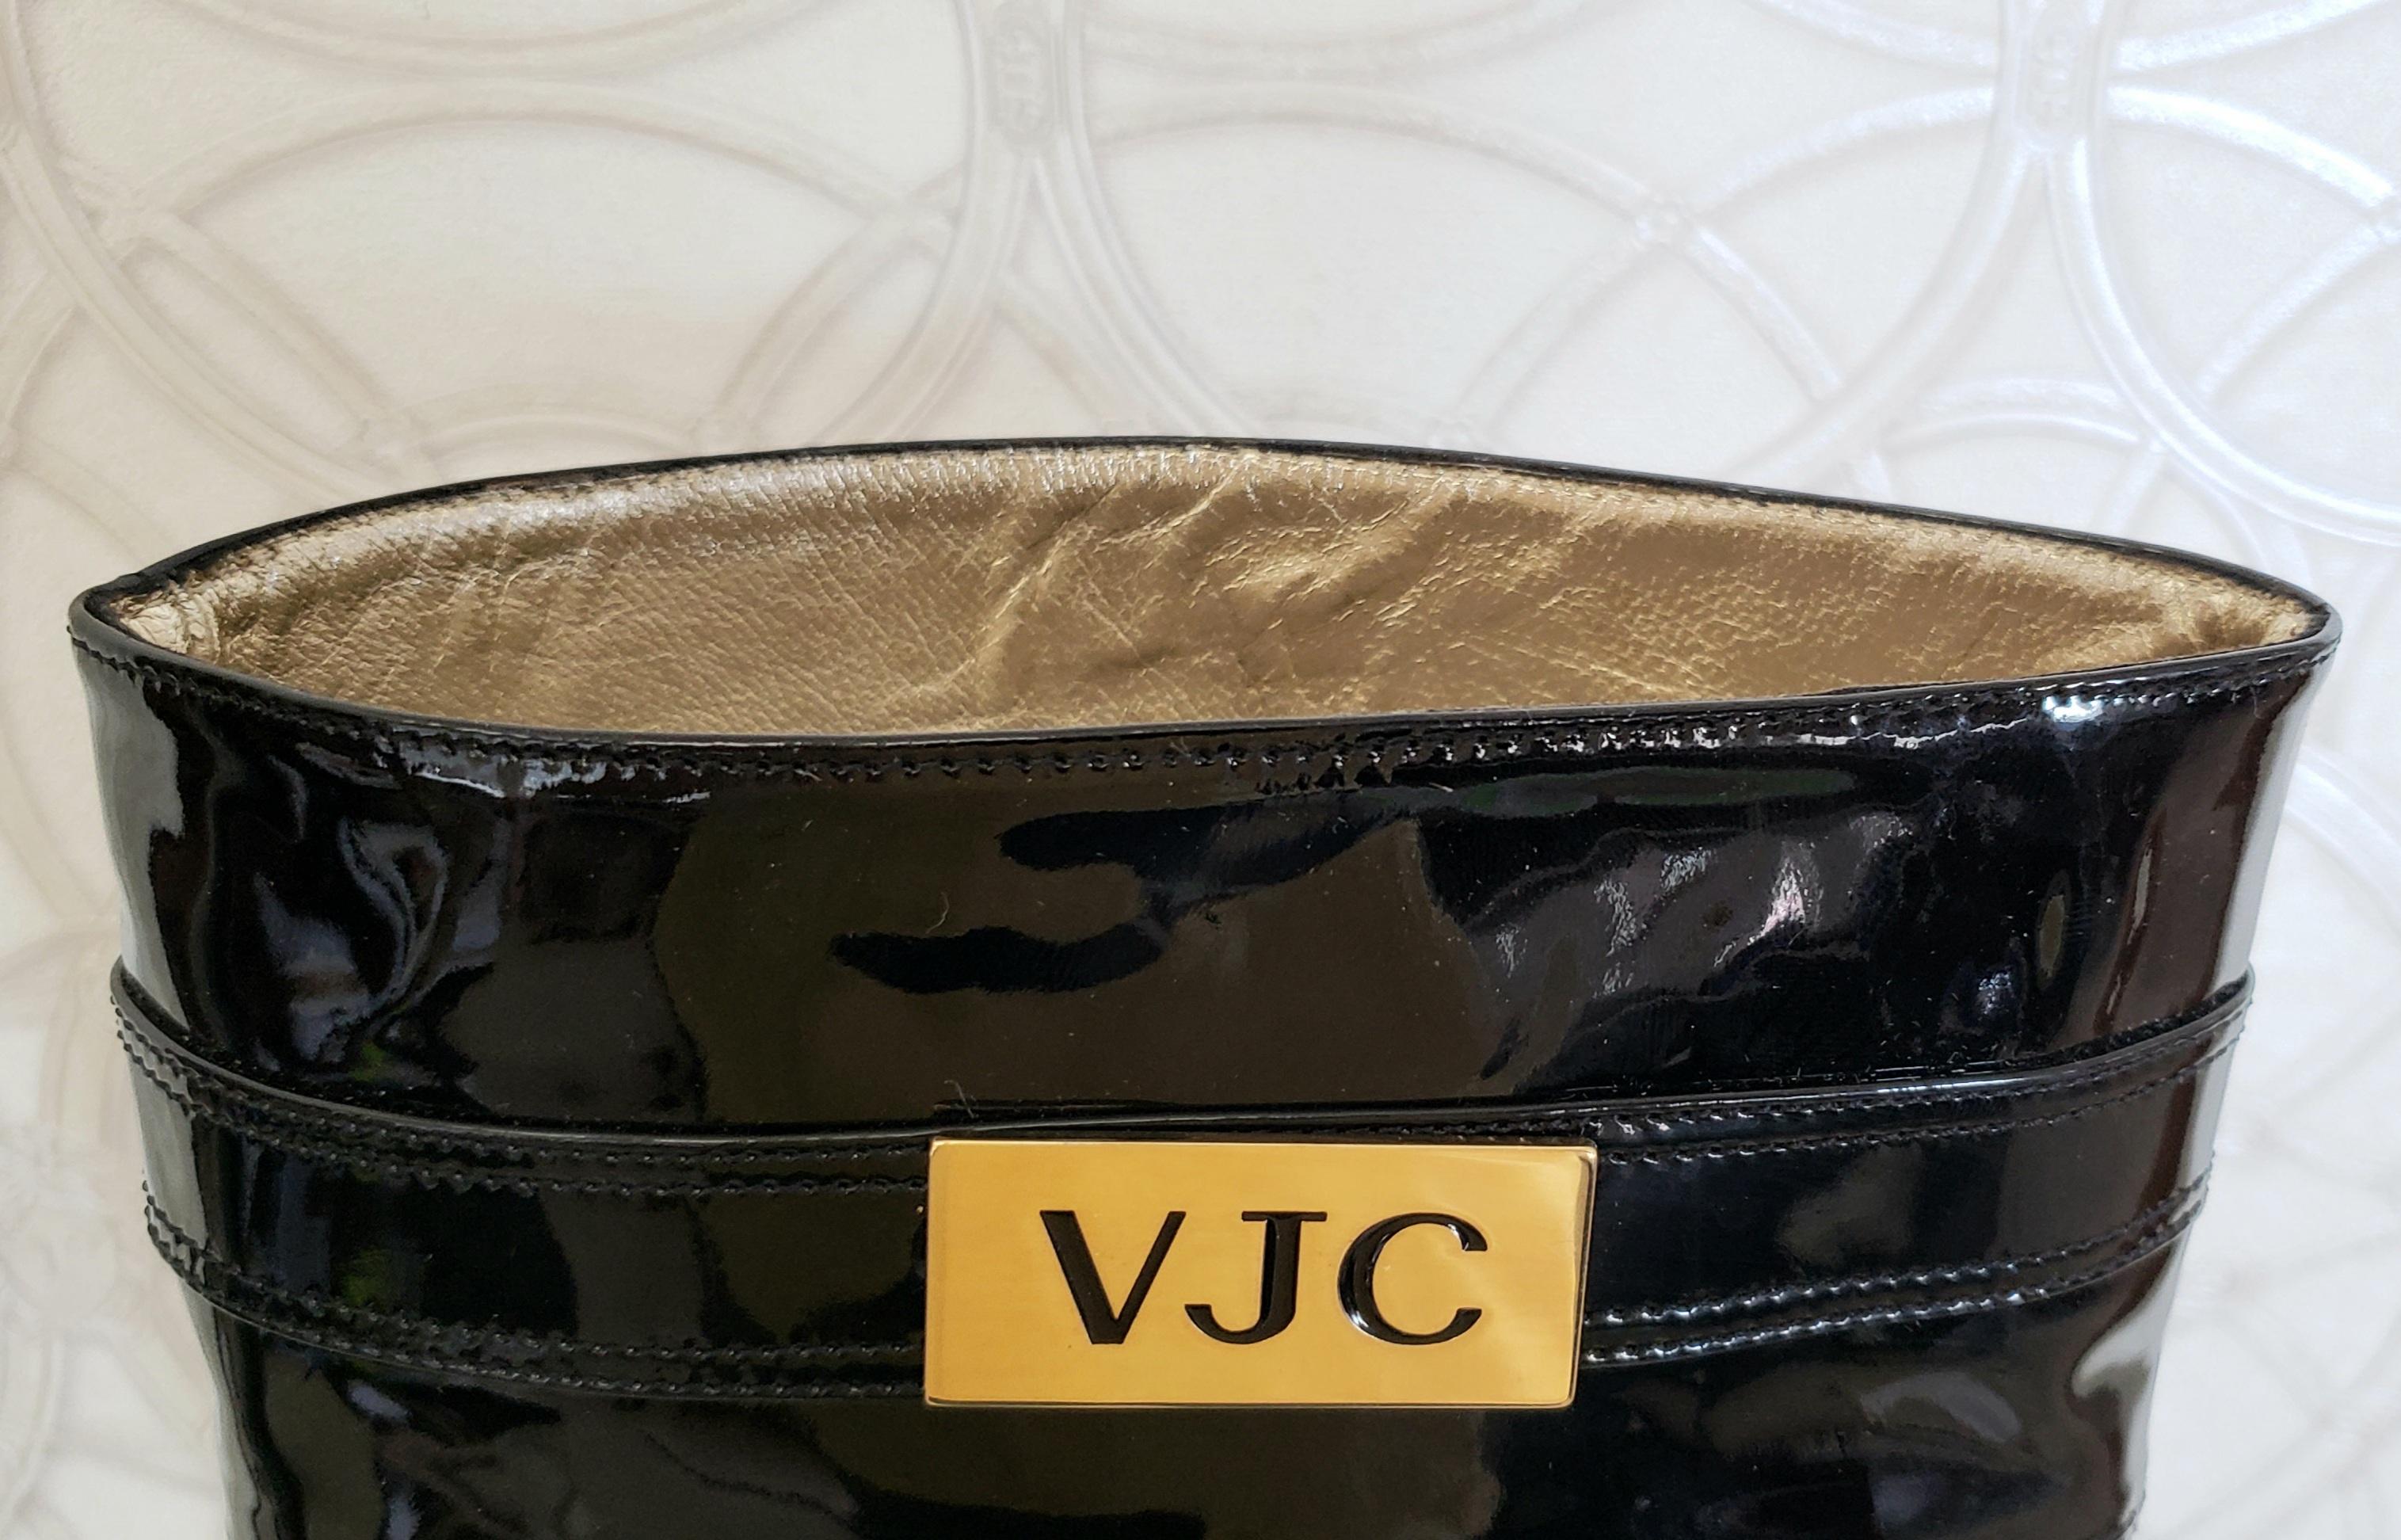 New VERSACE VJC BLACK PATENT LEATHER BOOTS 39 - 9 In New Condition For Sale In Montgomery, TX